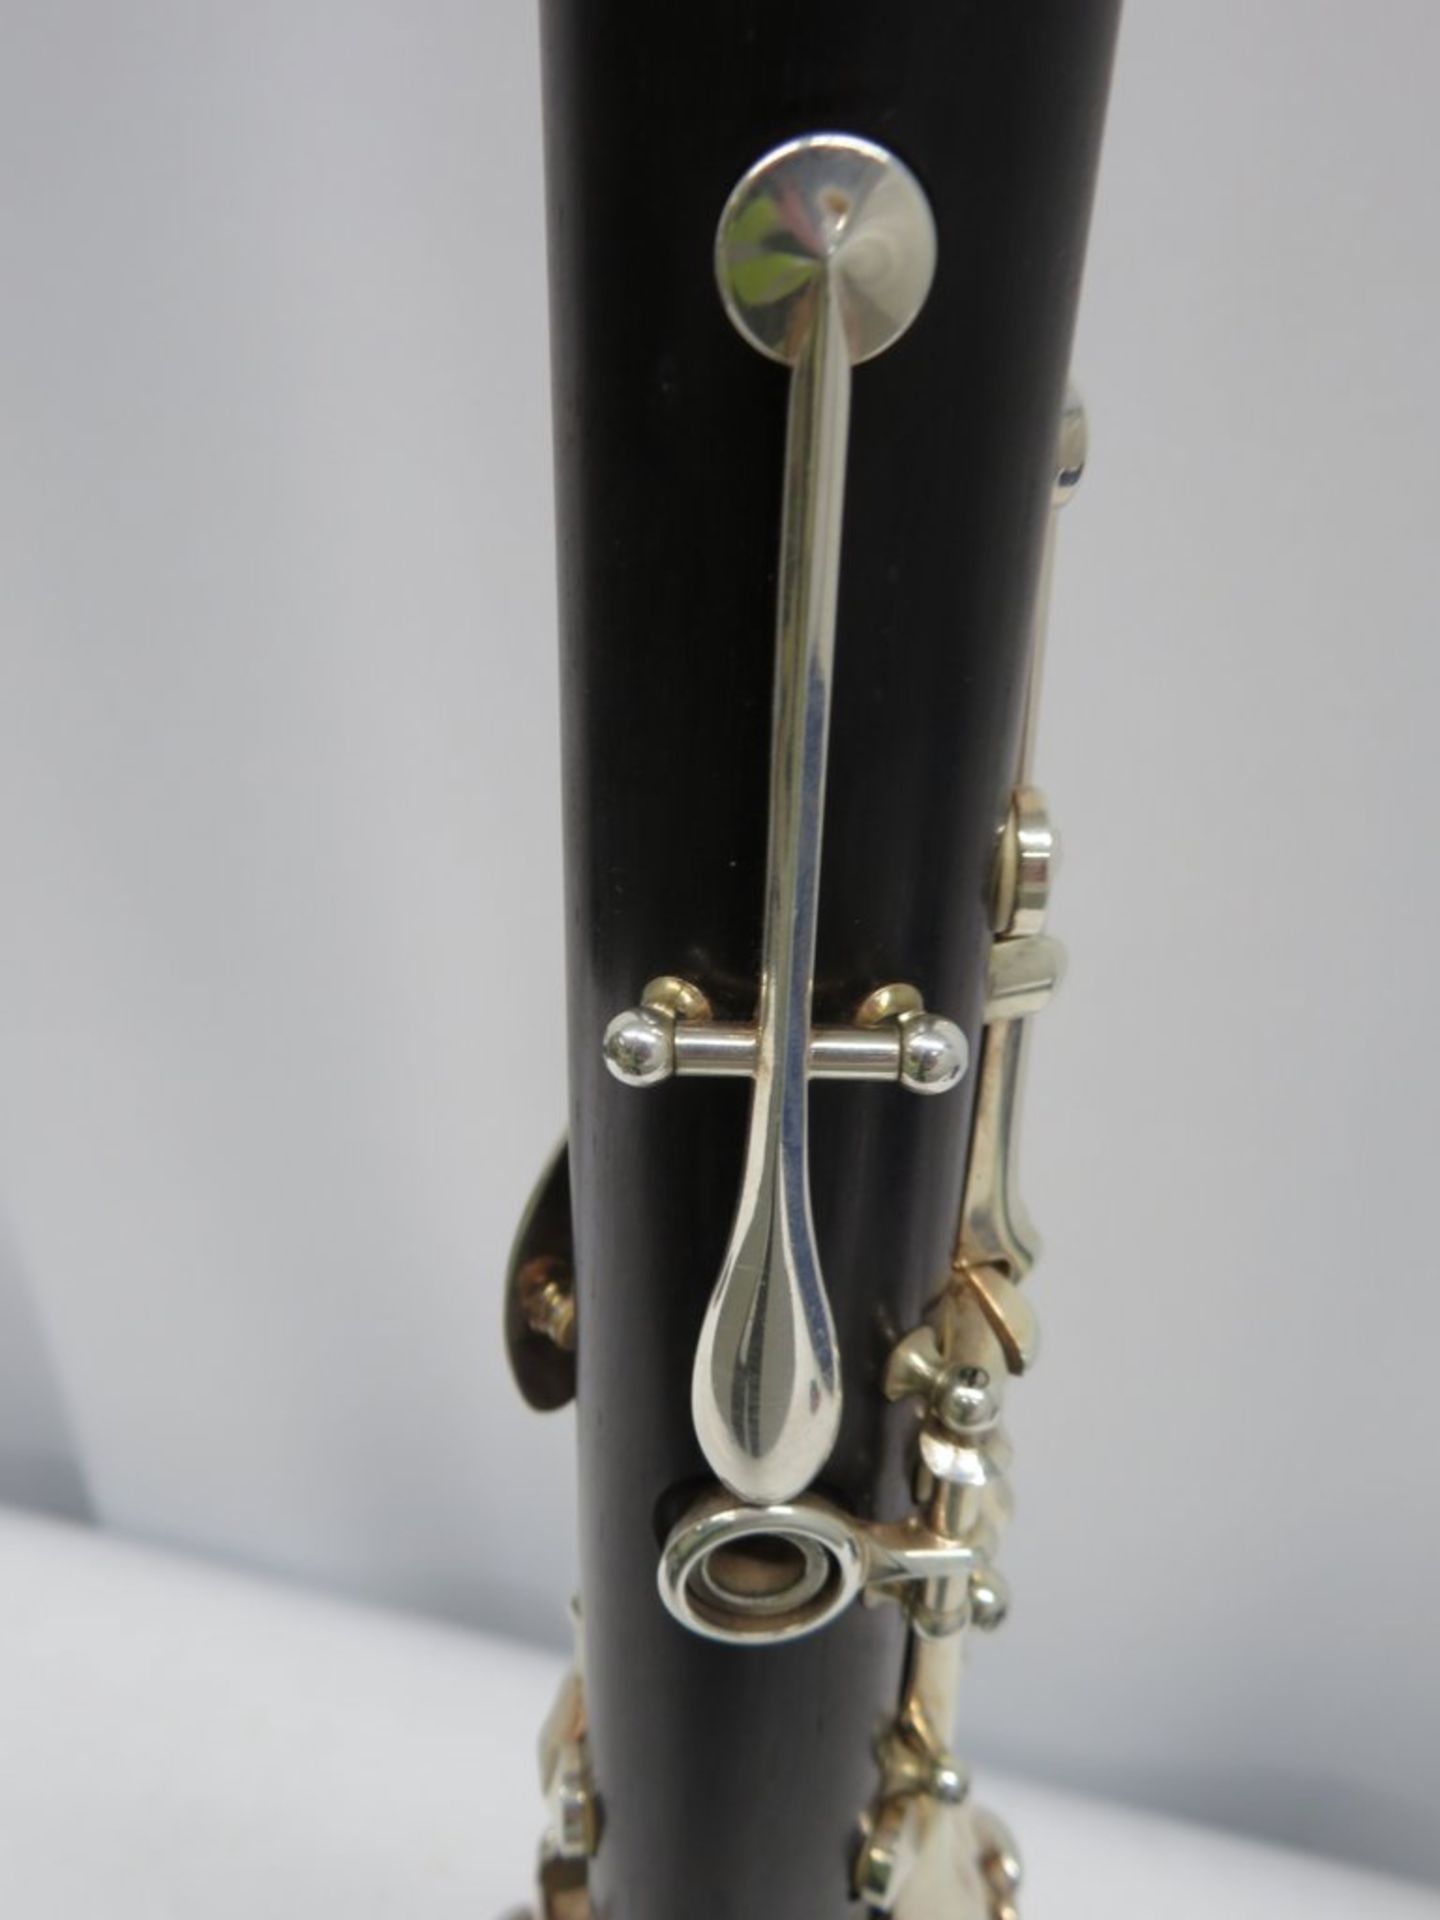 Buffet Crampon R13 Clarinet With Case. Serial Number: 386372. Full Length 63cm. Please No - Image 10 of 14